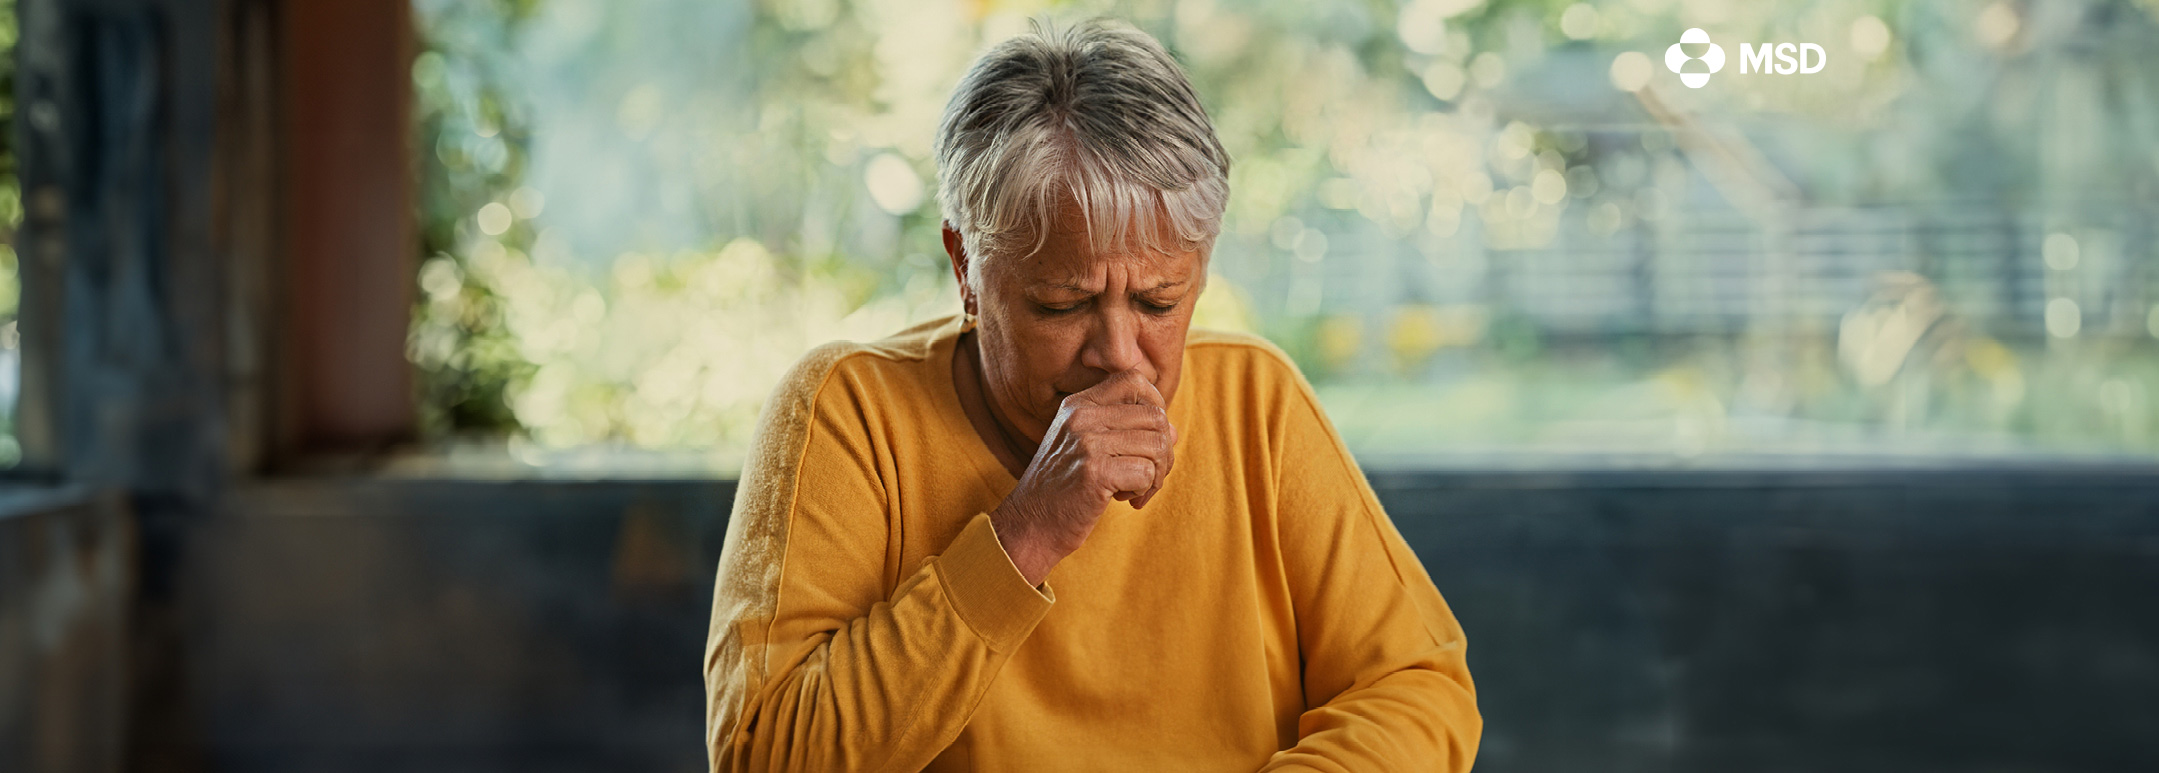 A concerned older woman coughs into her hand.